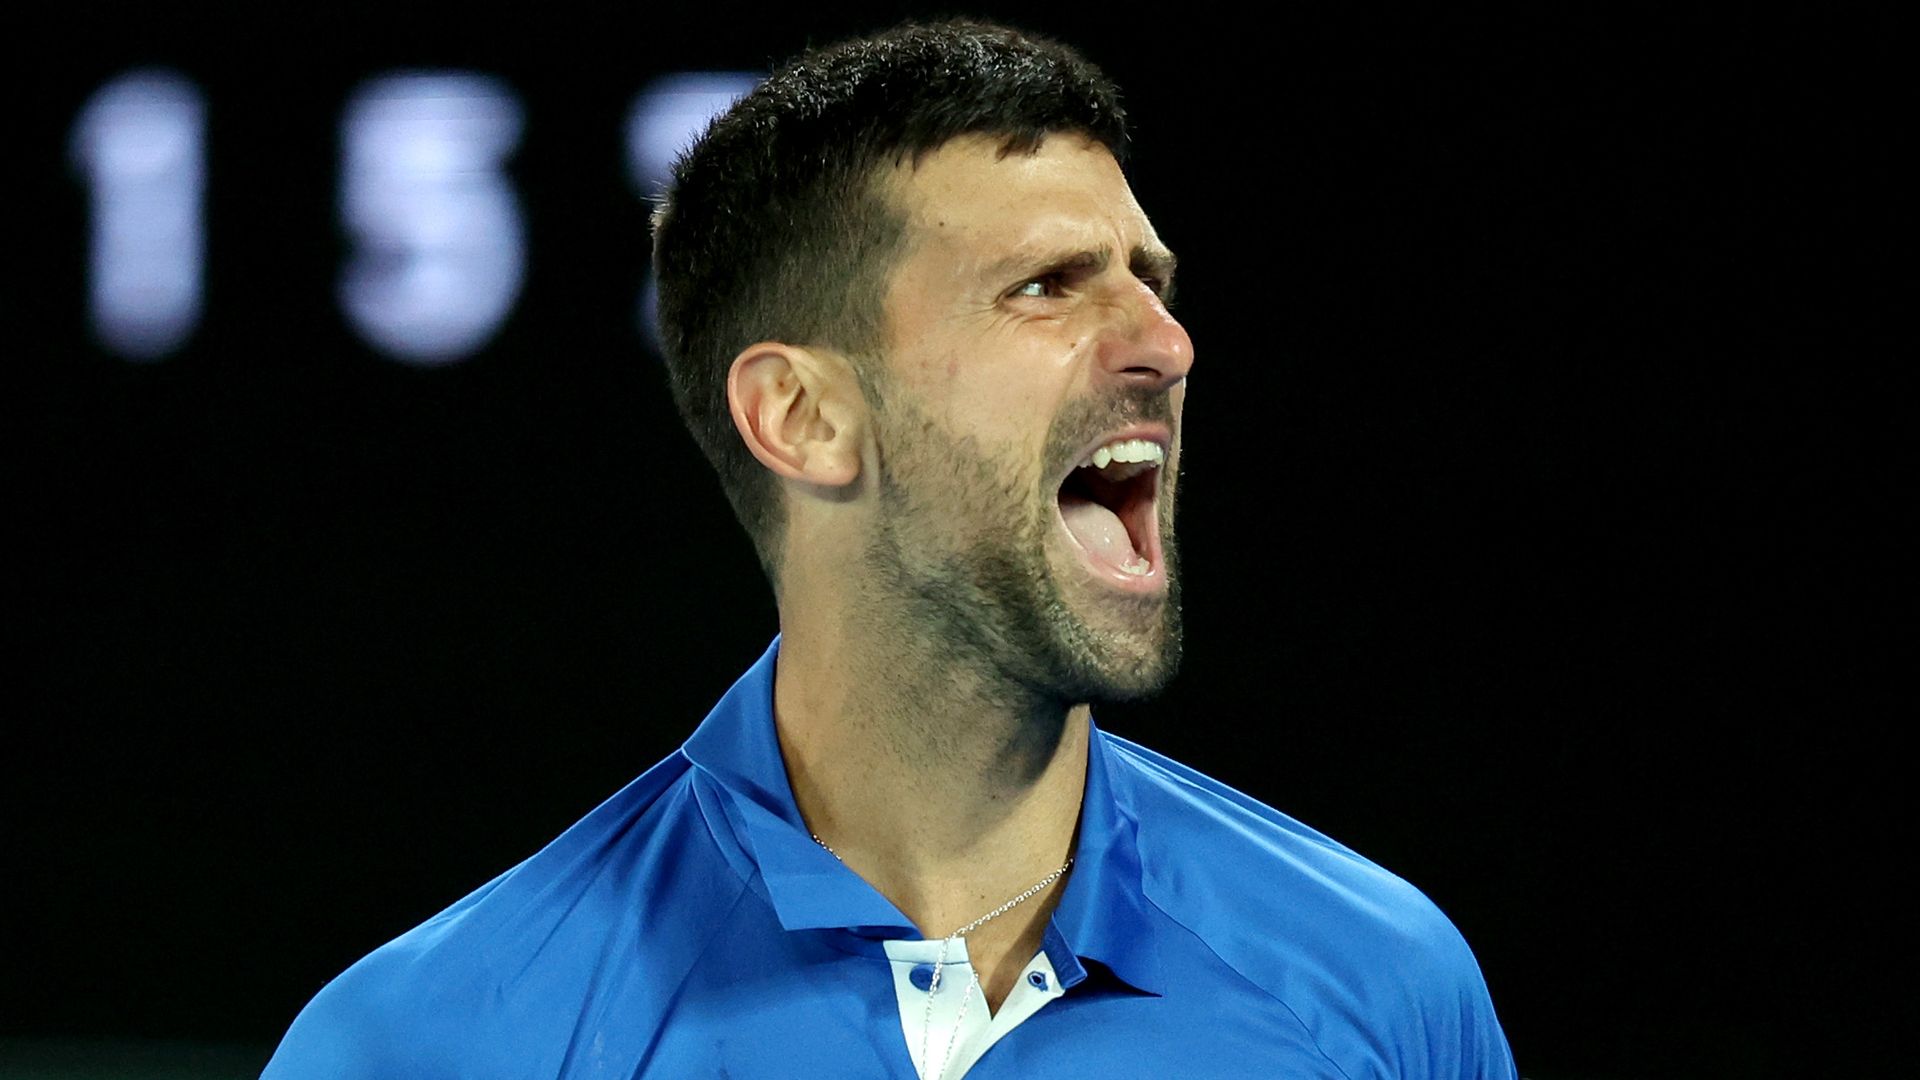 'Tell it to my face!' - Djokovic calls out heckler in battling victory